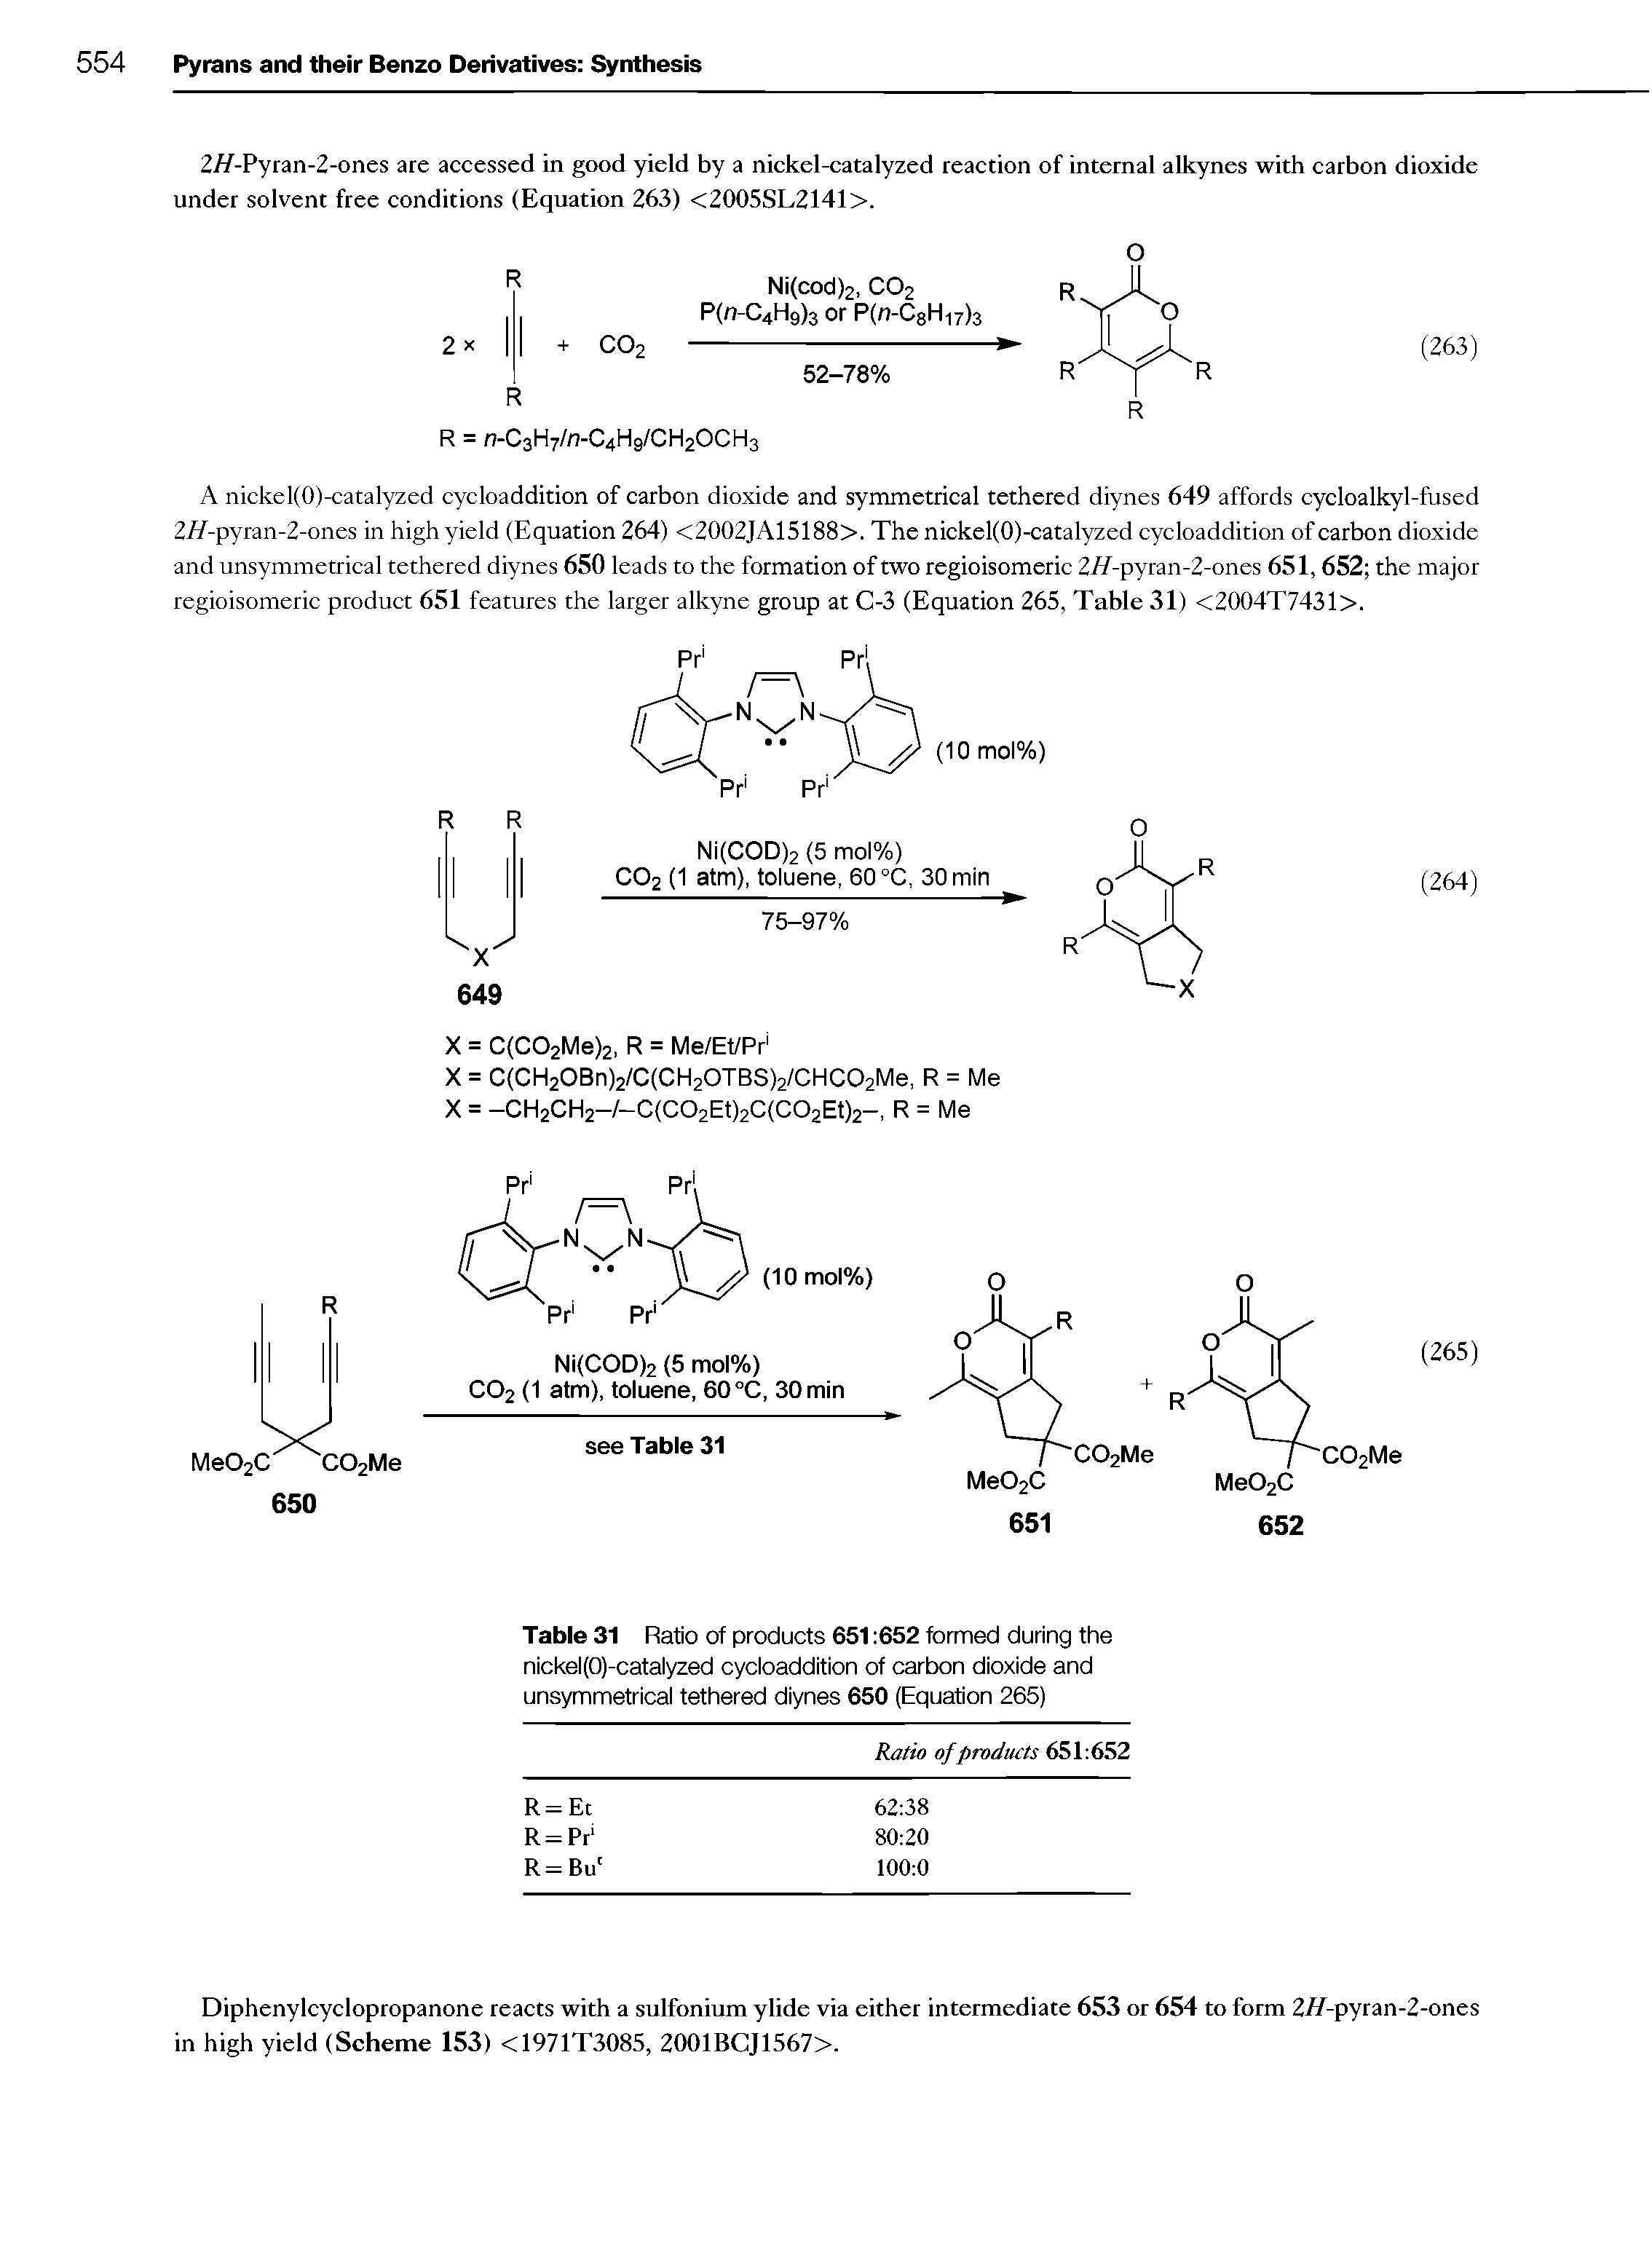 Table 31 Ratio of products 651 652 formed during the nickei(0)-catalyzed cycloaddition of carbon dioxide and unsymmetrical tethered diynes 650 (Equation 265)...